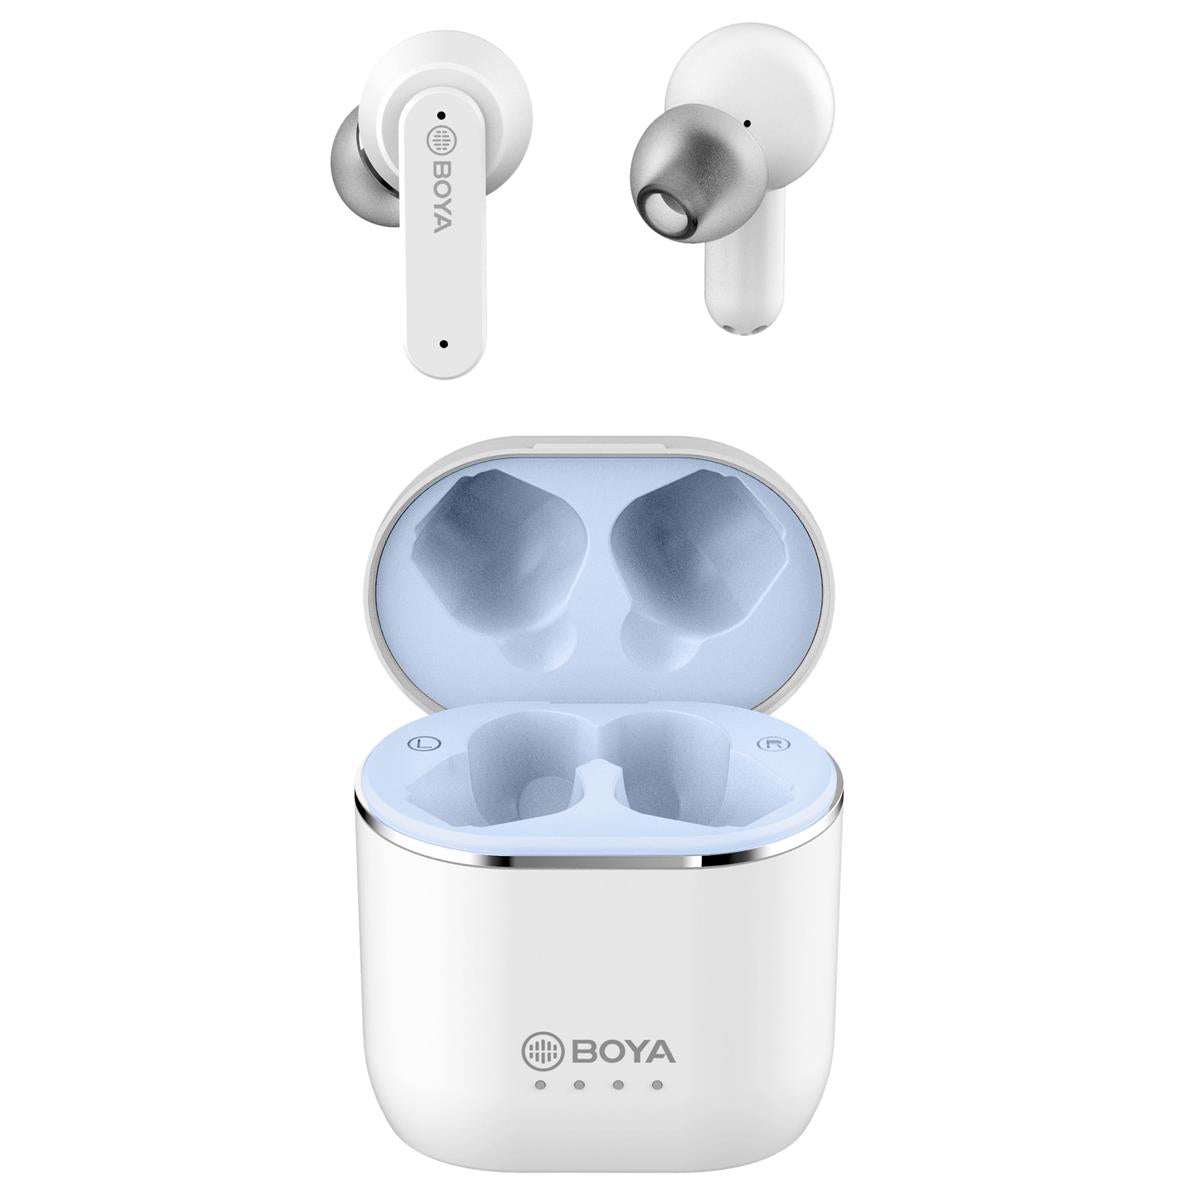 Boya BY-AP4 Bluetooth 5.0 Super Lightweight True Wireless Stereo Semi In-Ear Earbuds with Charging Case up to 6hrs Playtime (Black, White, Gray)